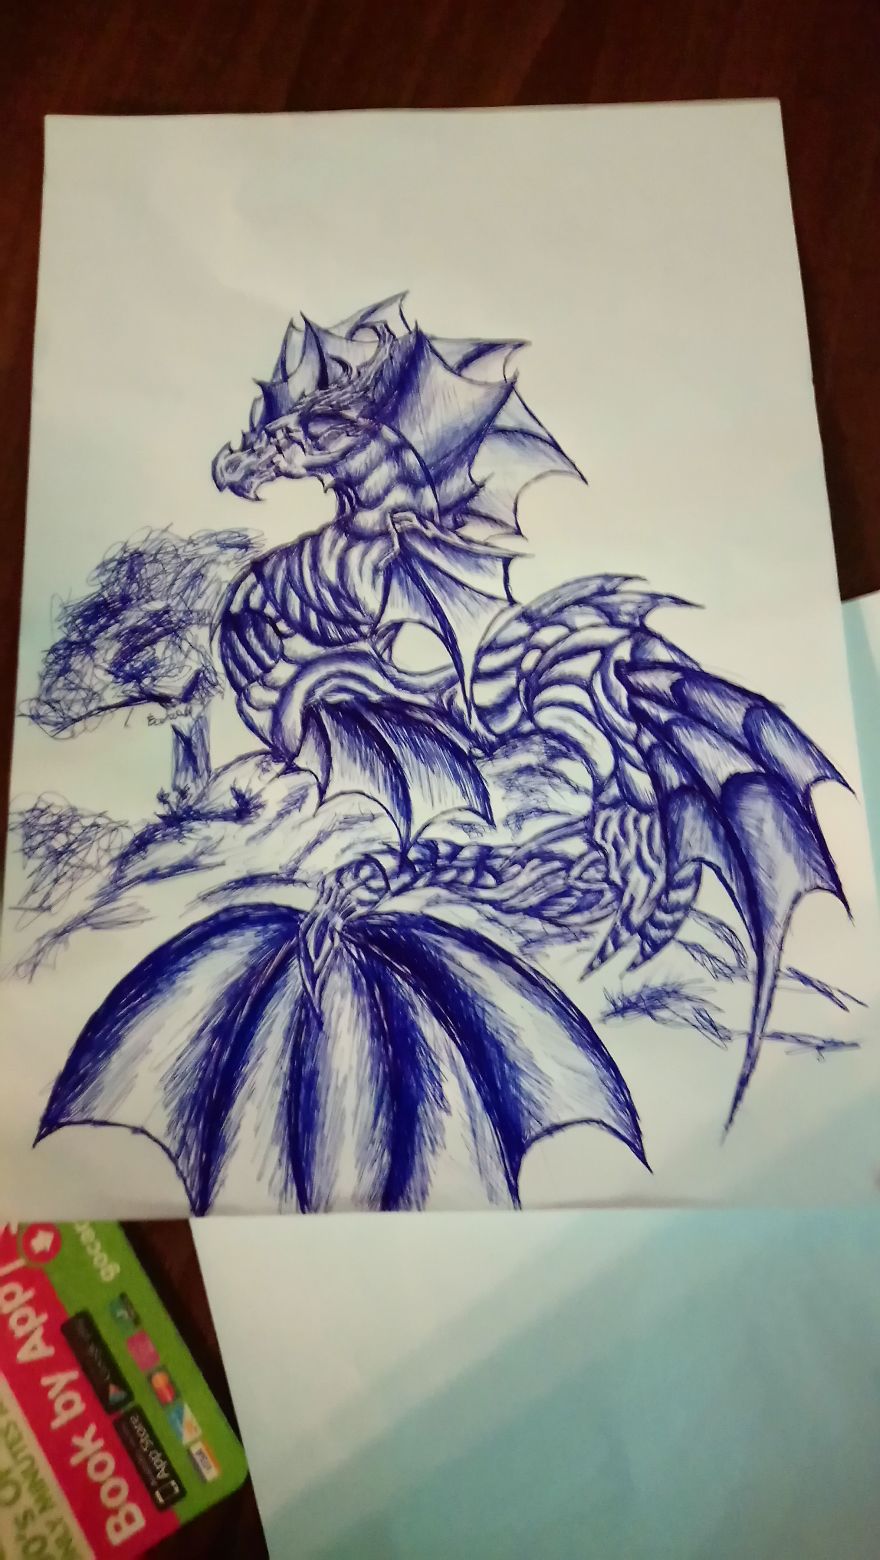 My Fantasy Drawings And Realism